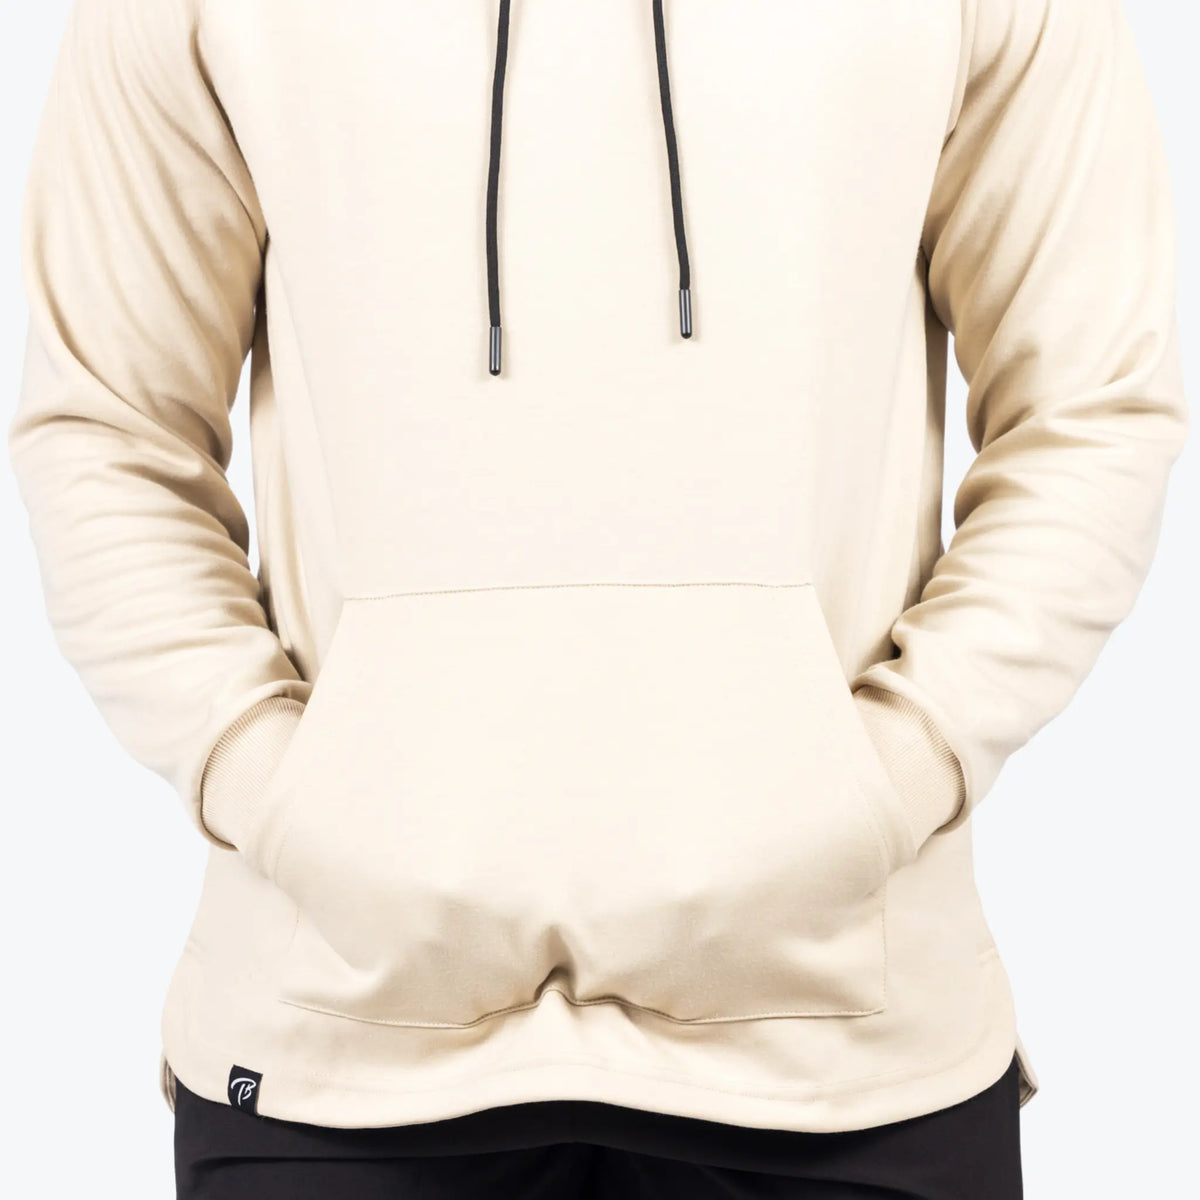 This image displays a close-up of a cream-colored training hoodie with a kangaroo pouch pocket. The design is sleek, featuring drawstrings with metal tips for an athletic look.